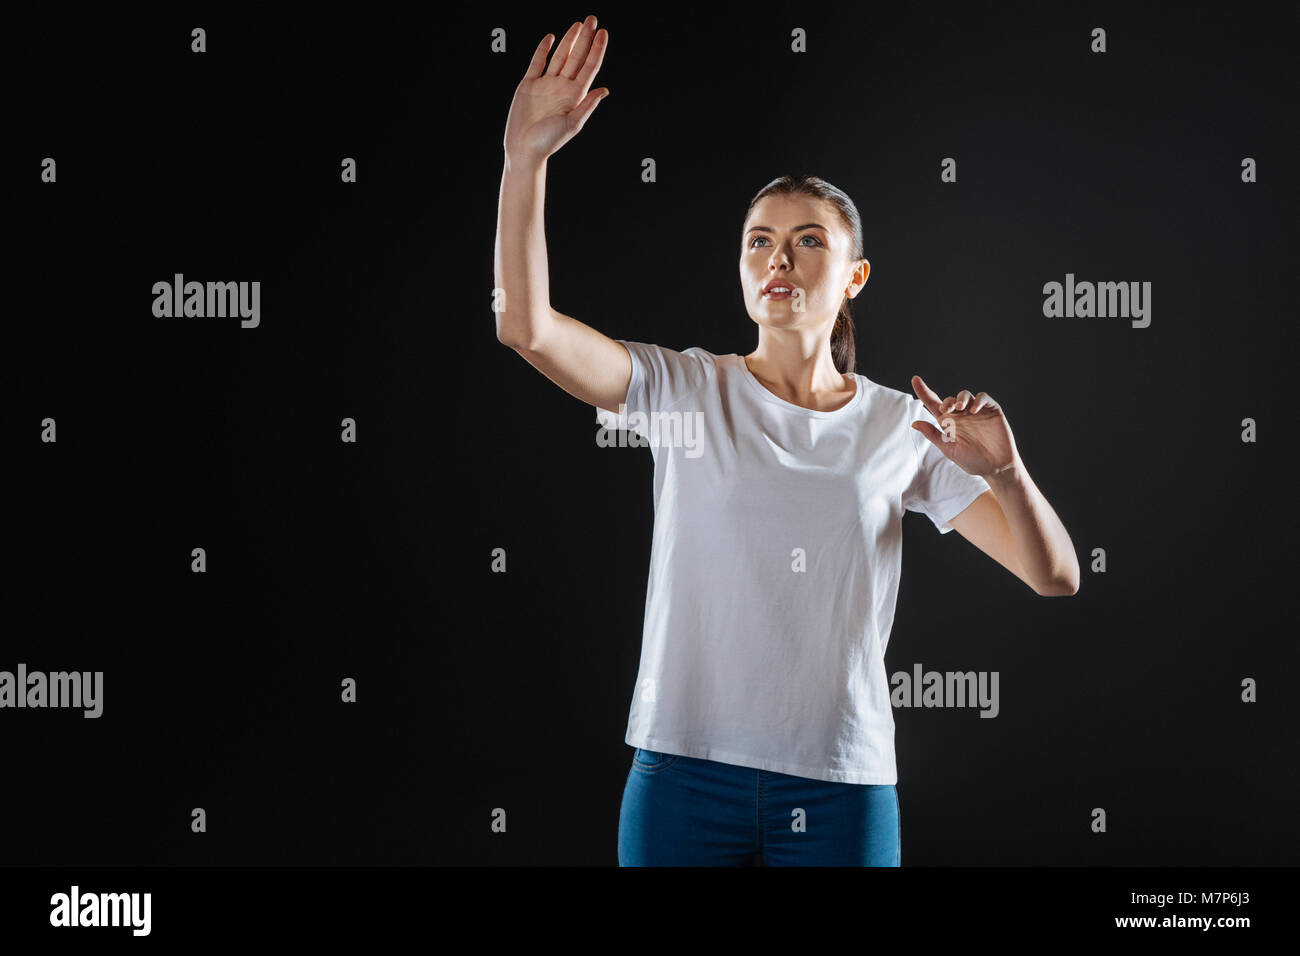 Creative pretty woman looking up lifting her hands. Stock Photo